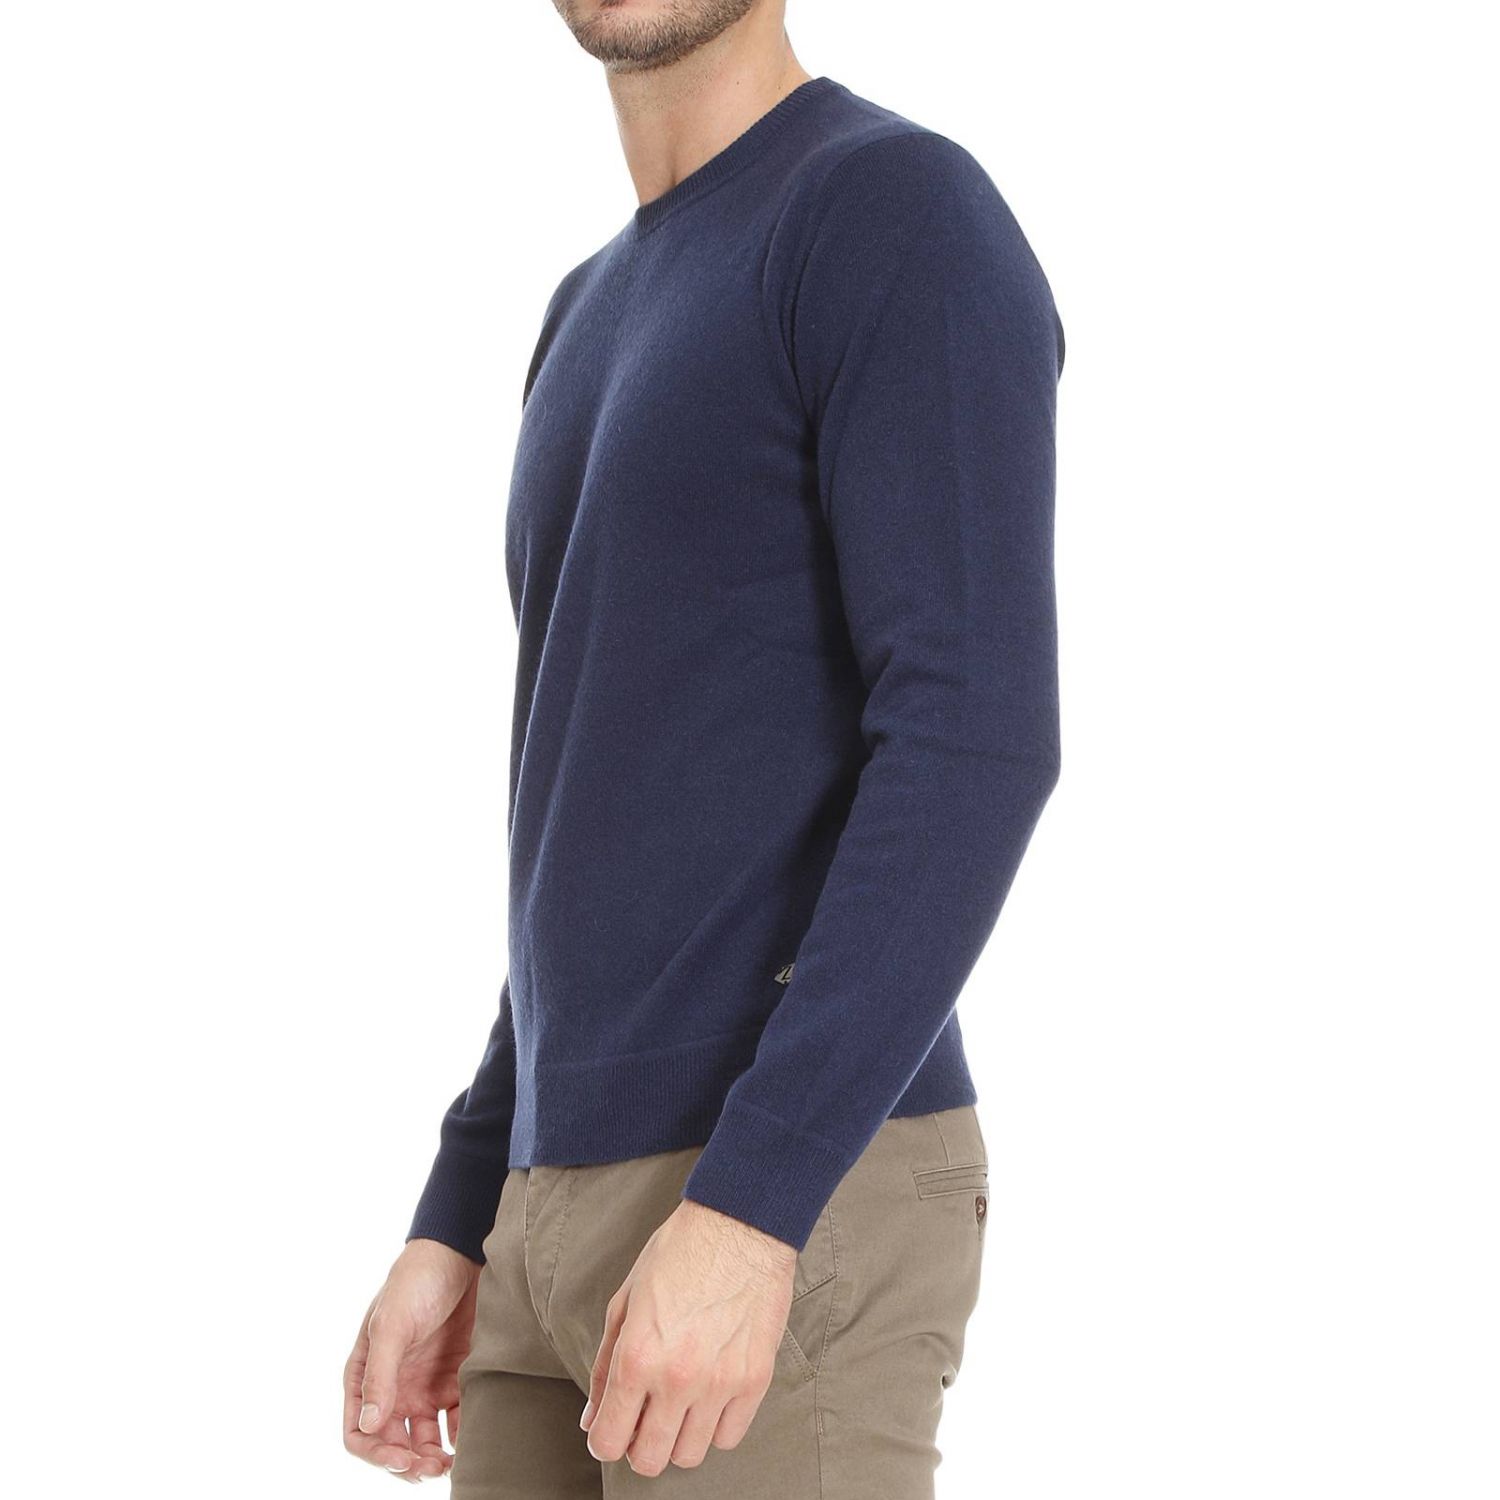 Z Zegna Outlet: Sweater man - Blue | Sweater Z Zegna ZZ110 VLH10 GIGLIO.COM